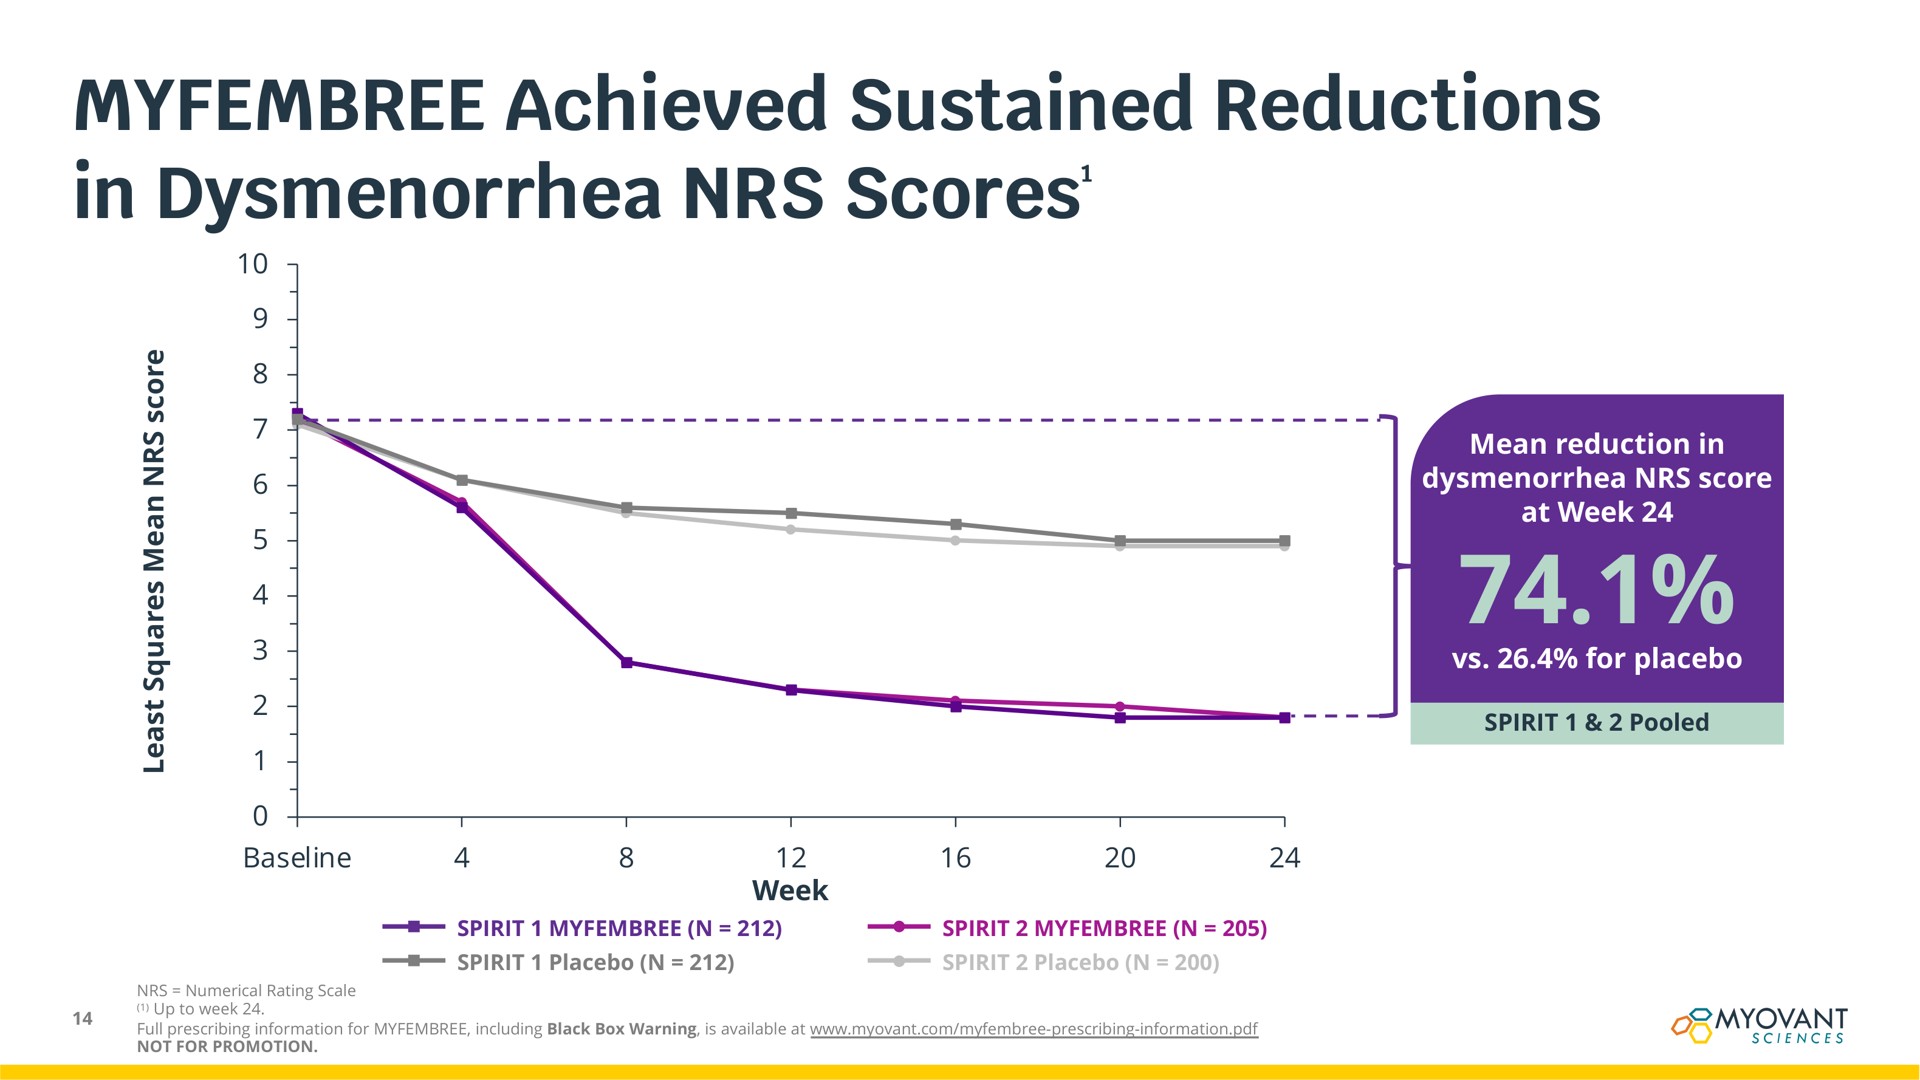 achieved sustained reductions in dysmenorrhea scores scores | Myovant Sciences